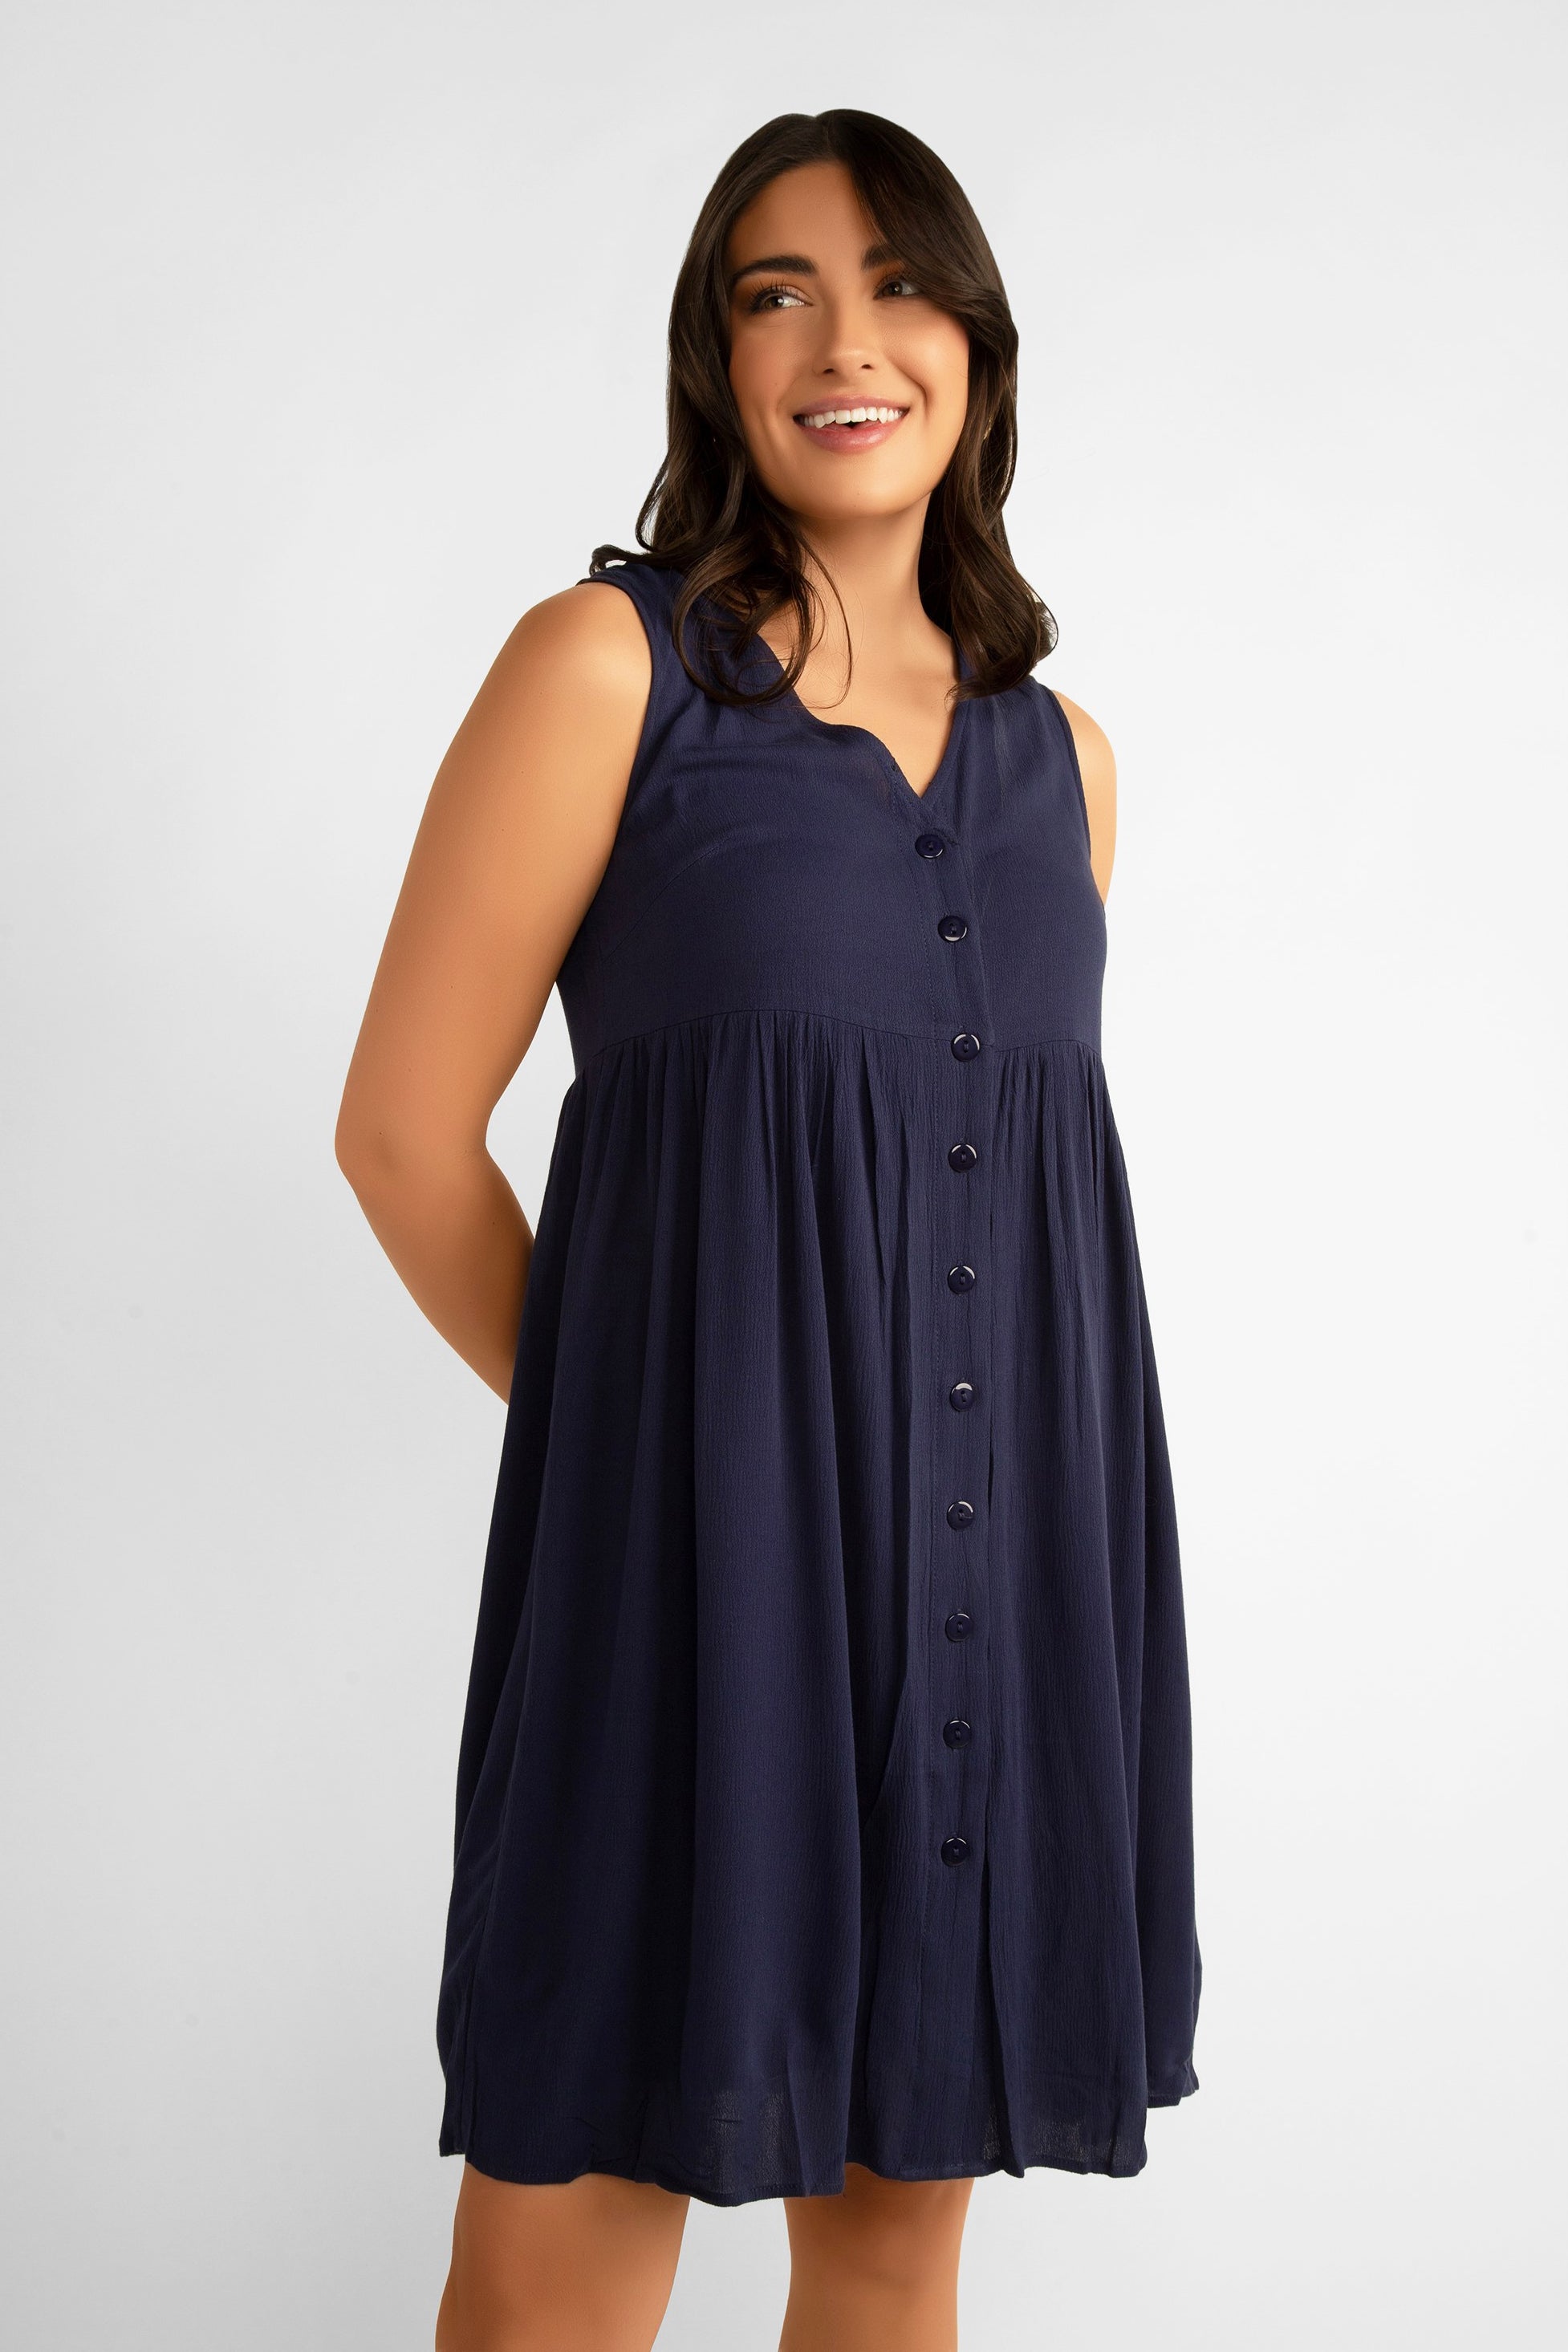 Pink Martini (DR-230524) Pheobe Dress - Button Front Sleeveless Above the Knee Dress in Navy